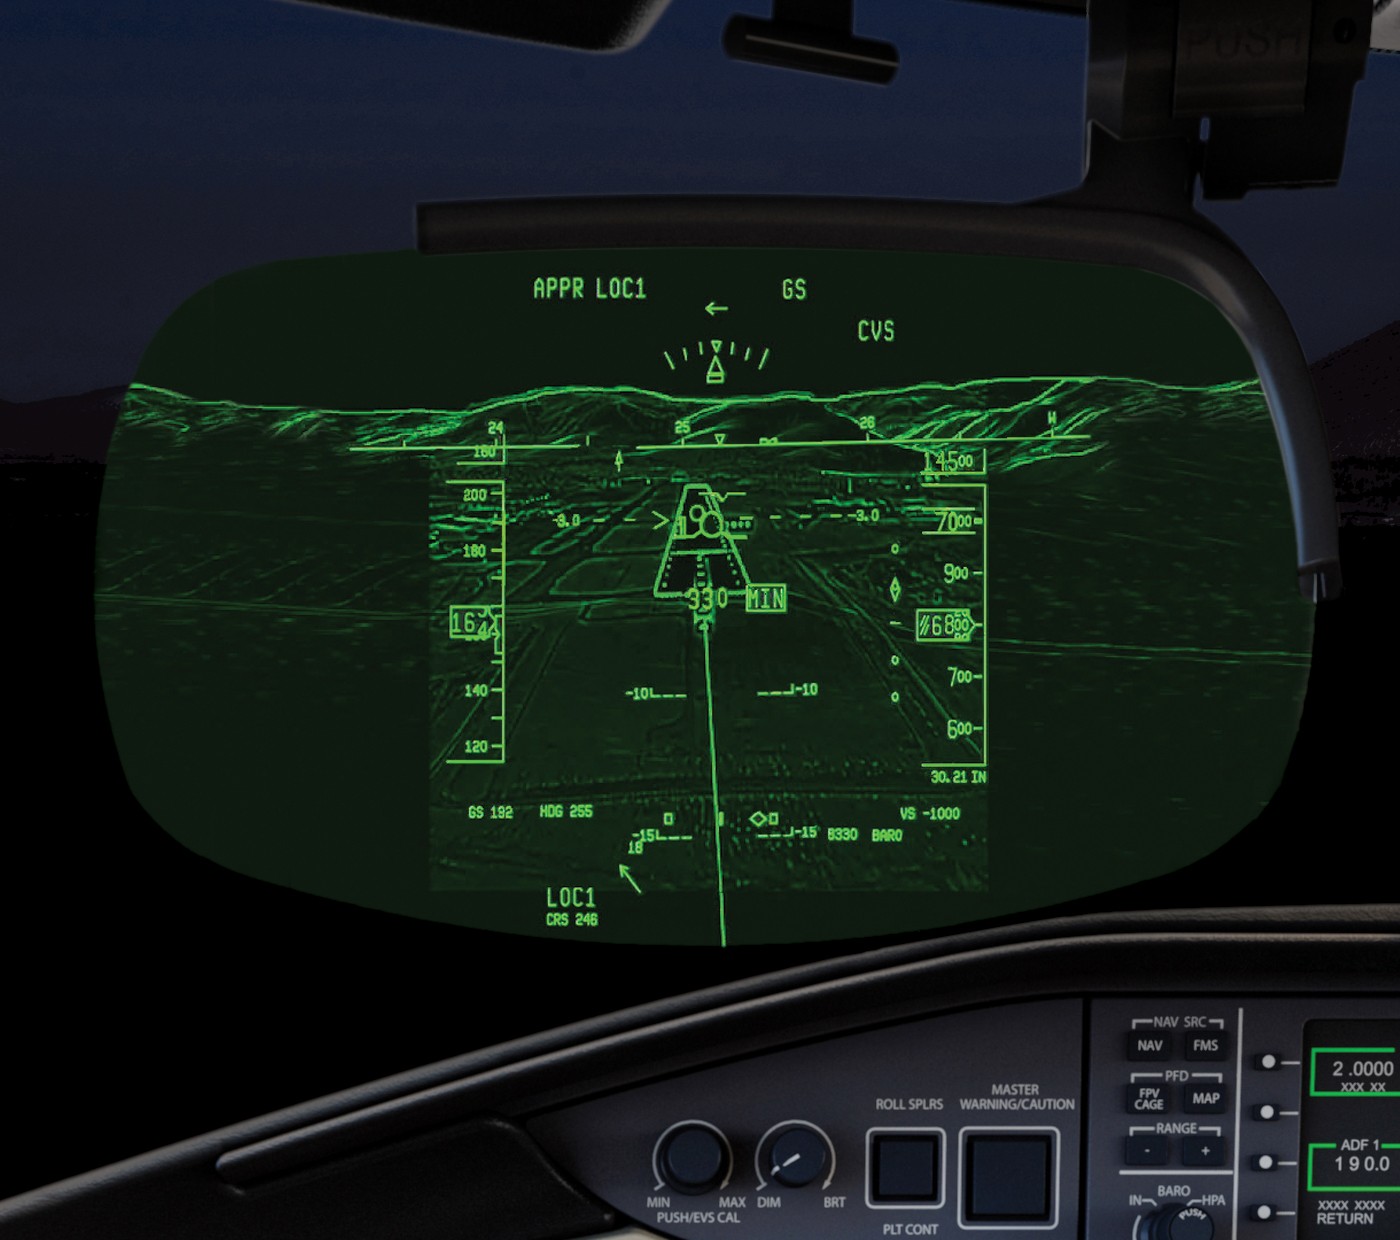 Global 6500 combined vision system